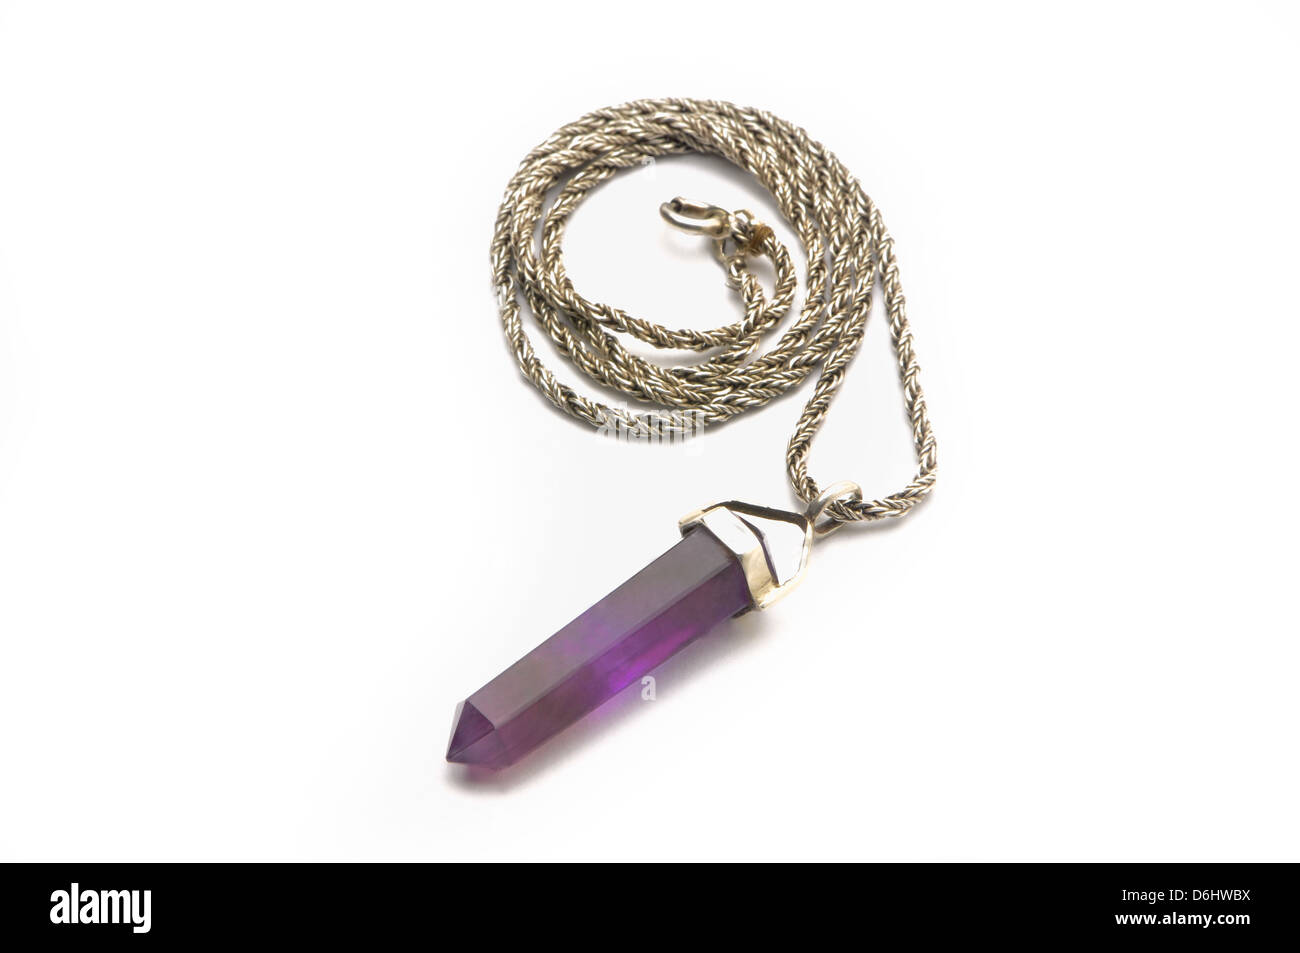 amethyst necklace with silver chain Stock Photo